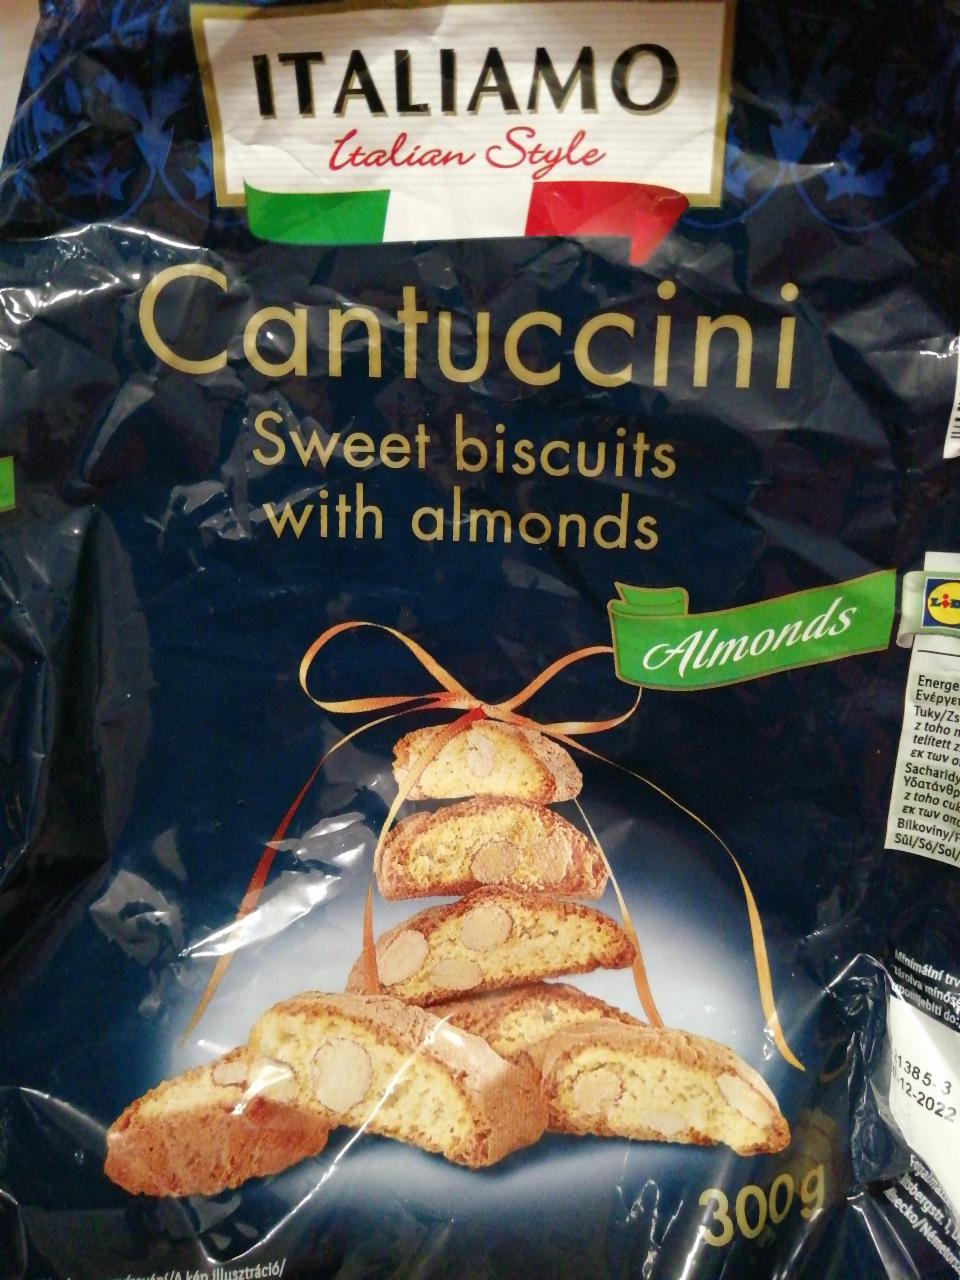 - hodnoty Sweet nutriční Italiamo kalorie, biscuits kJ a Cantuccini with almonds